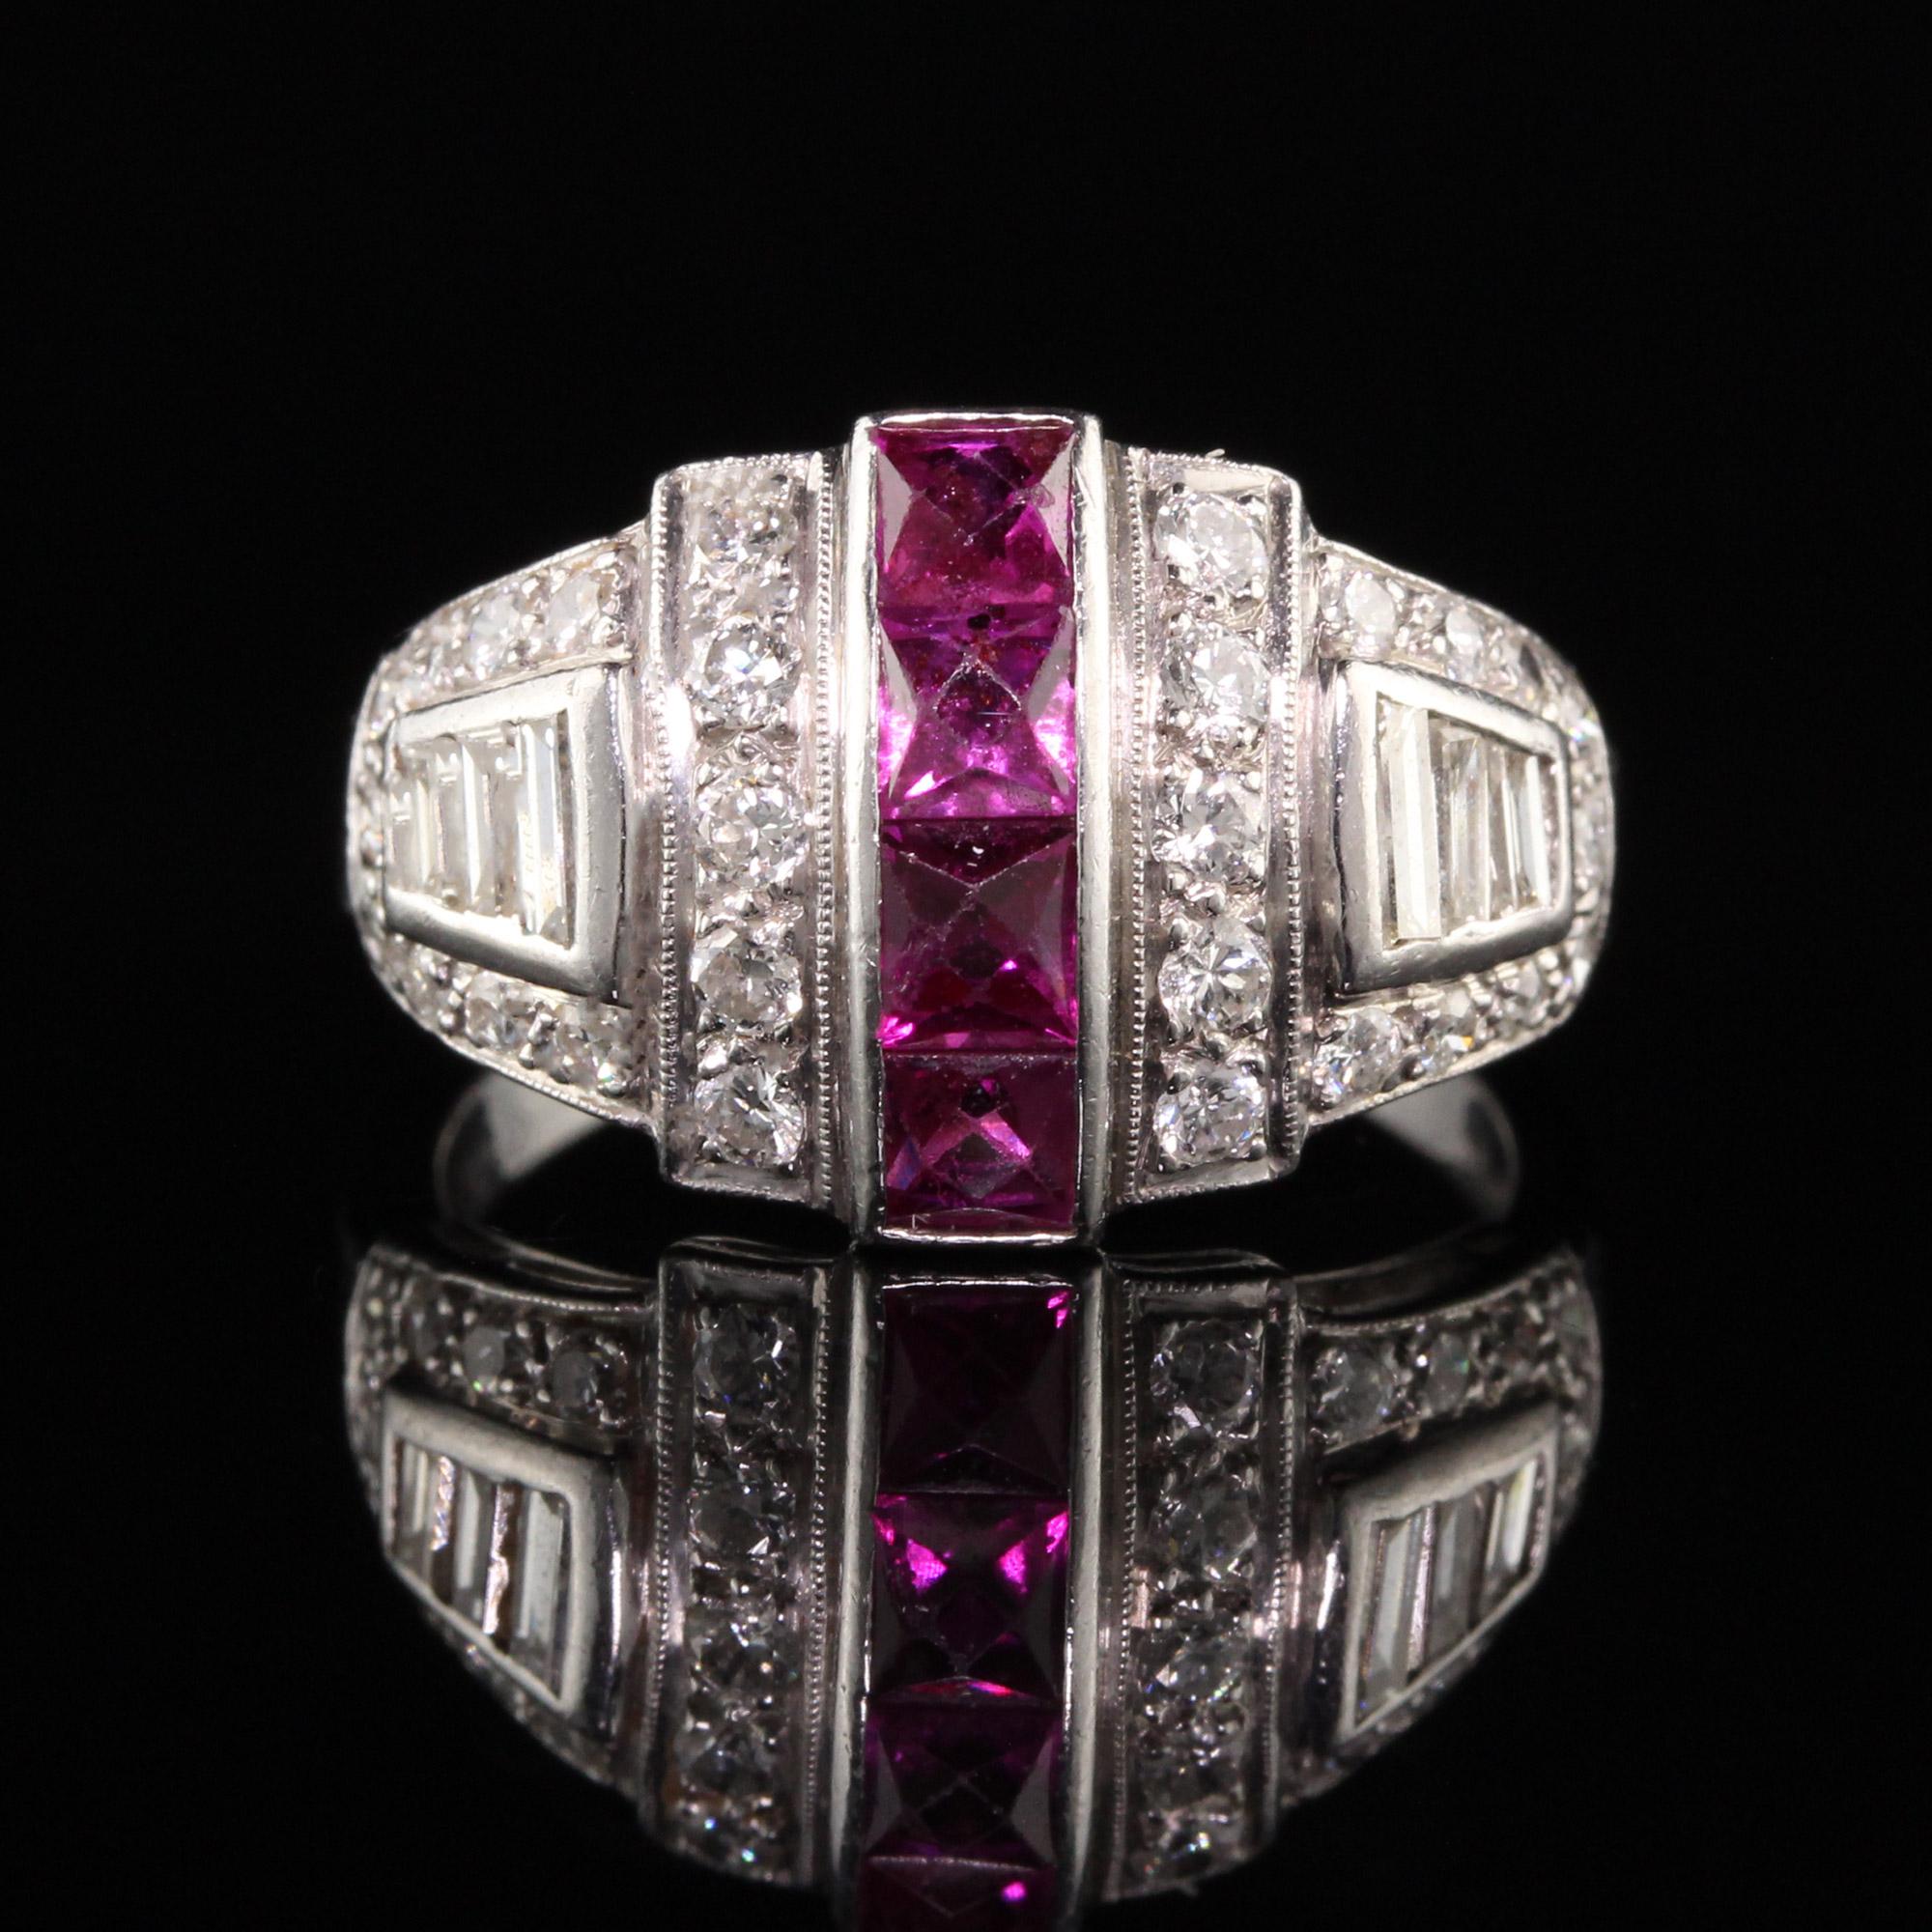 Antique Art Deco Platinum Diamond and French Cut Ruby Ring For Sale 1